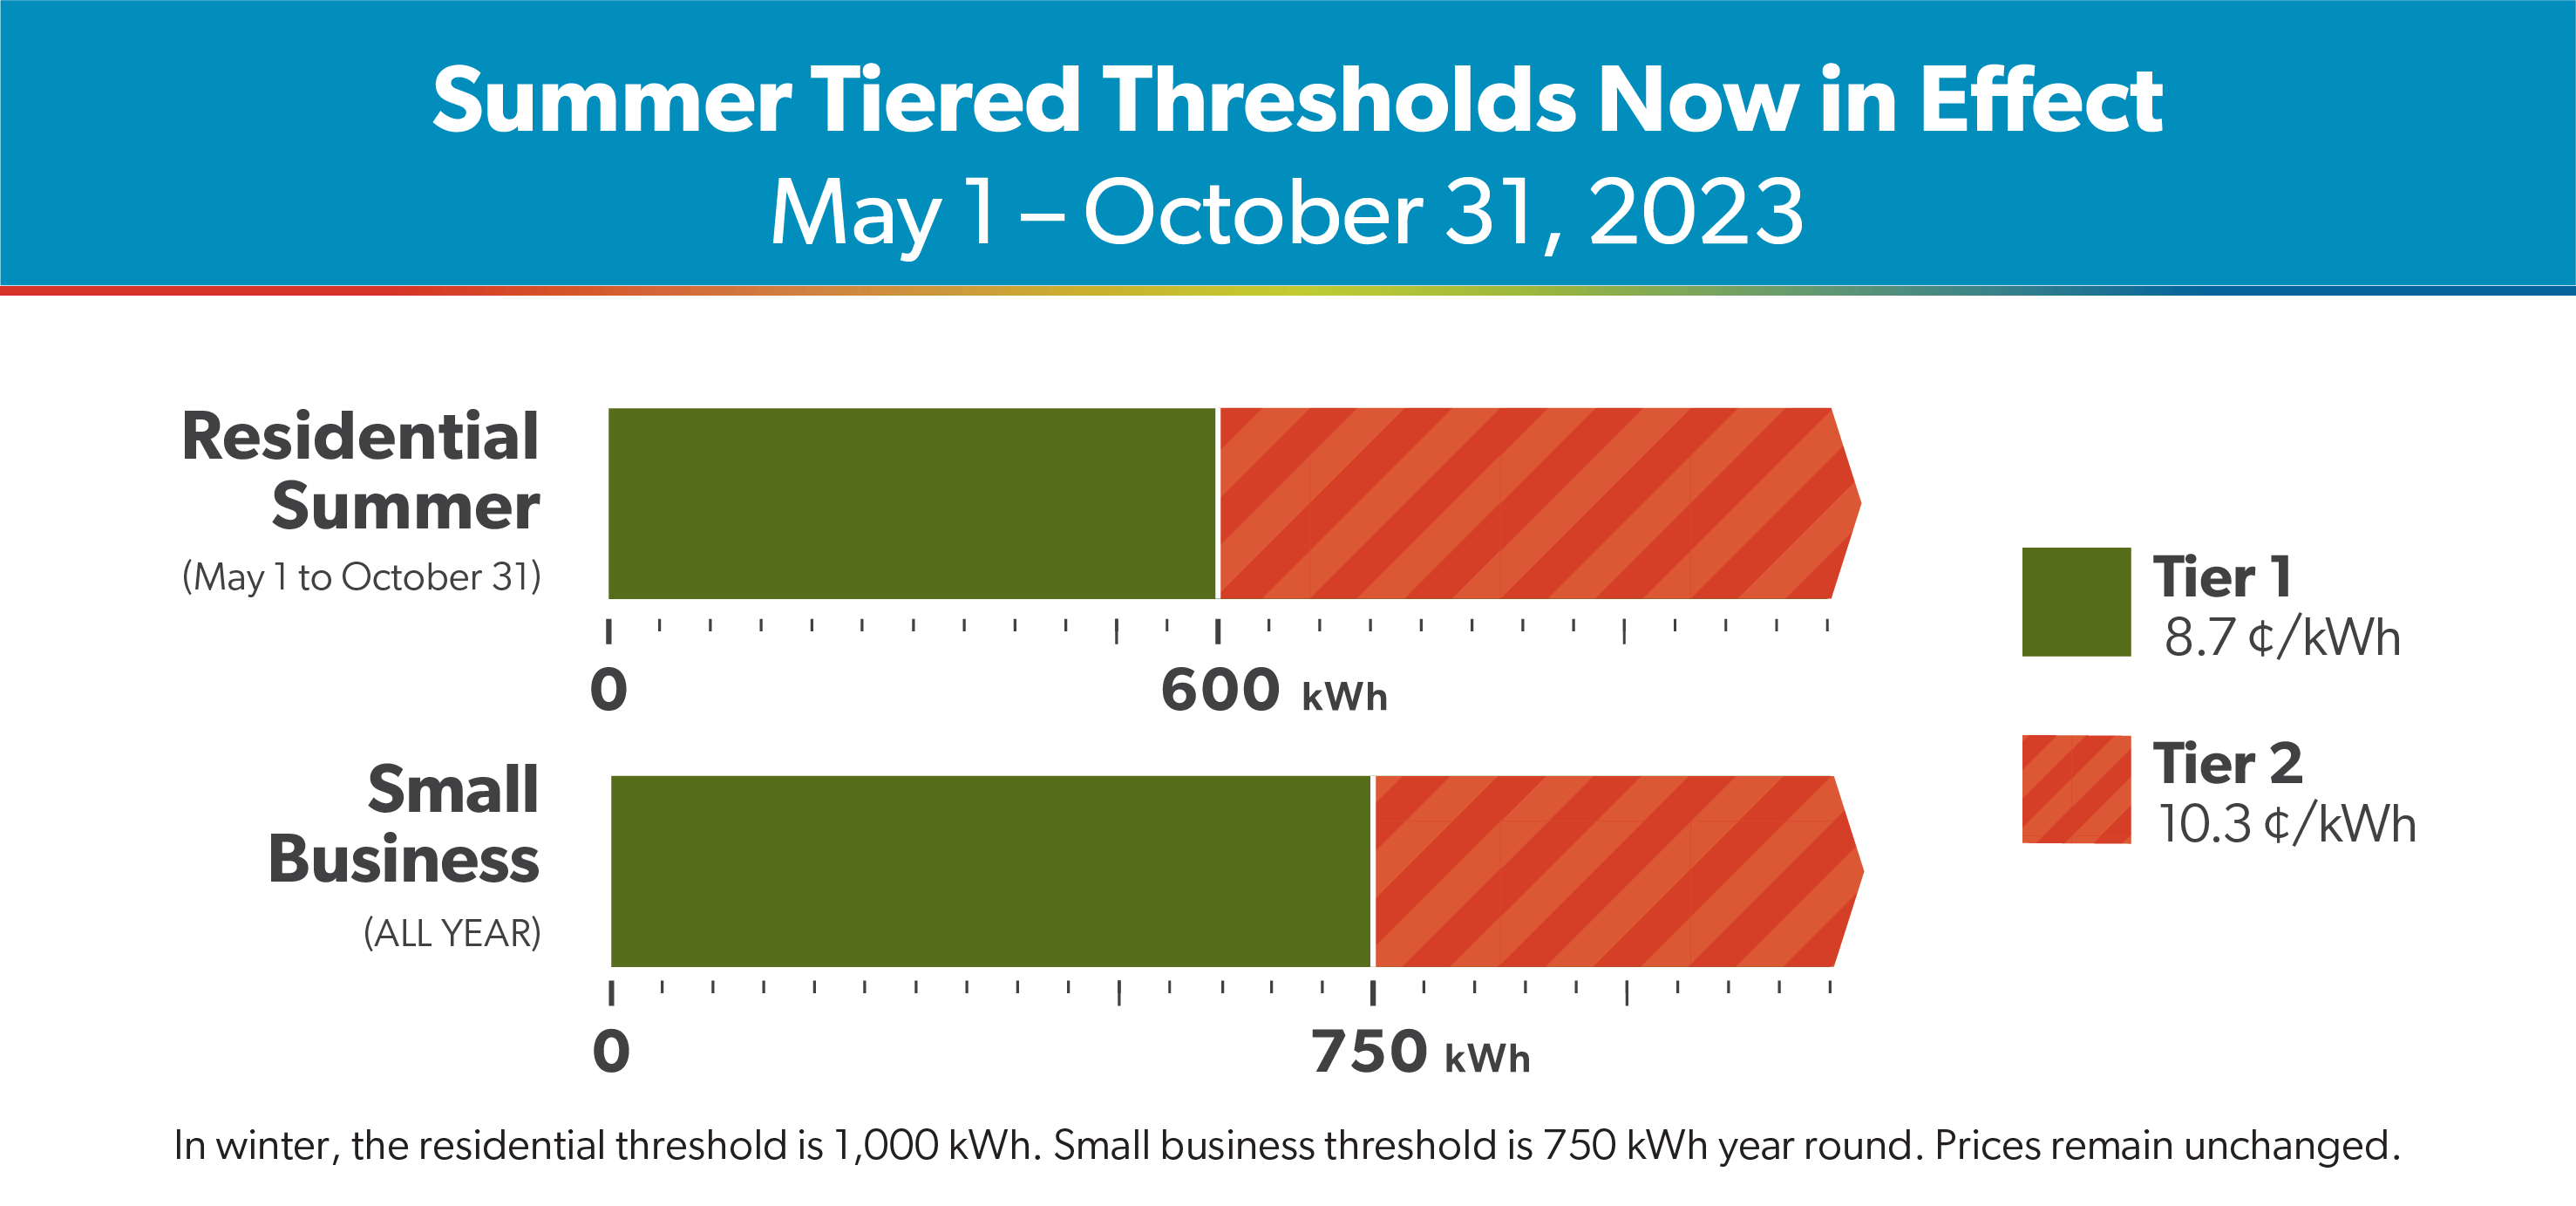 Tiered summer 2023 rates and thresholds